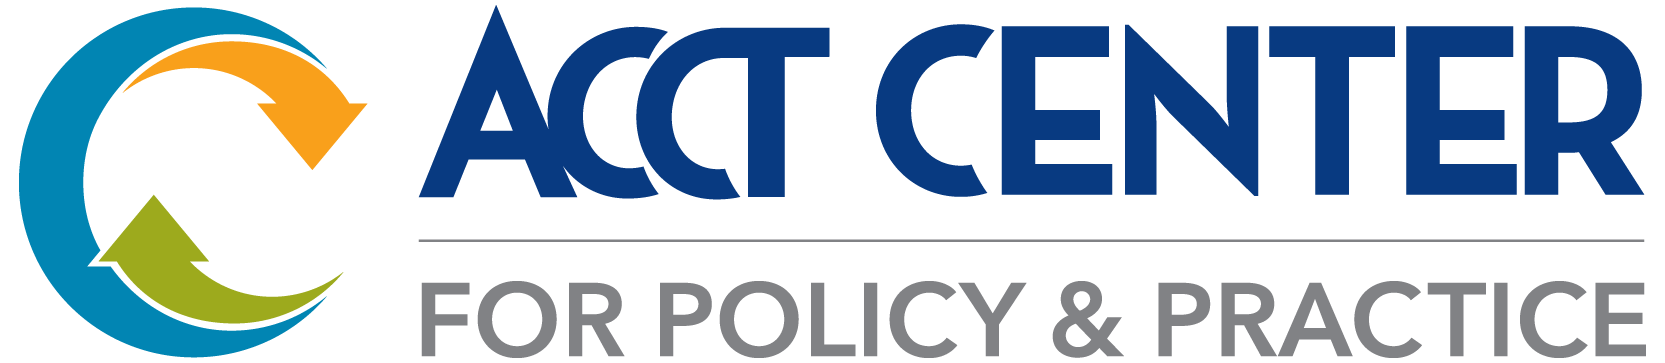 ACCT Center for Policy & Practice Logo